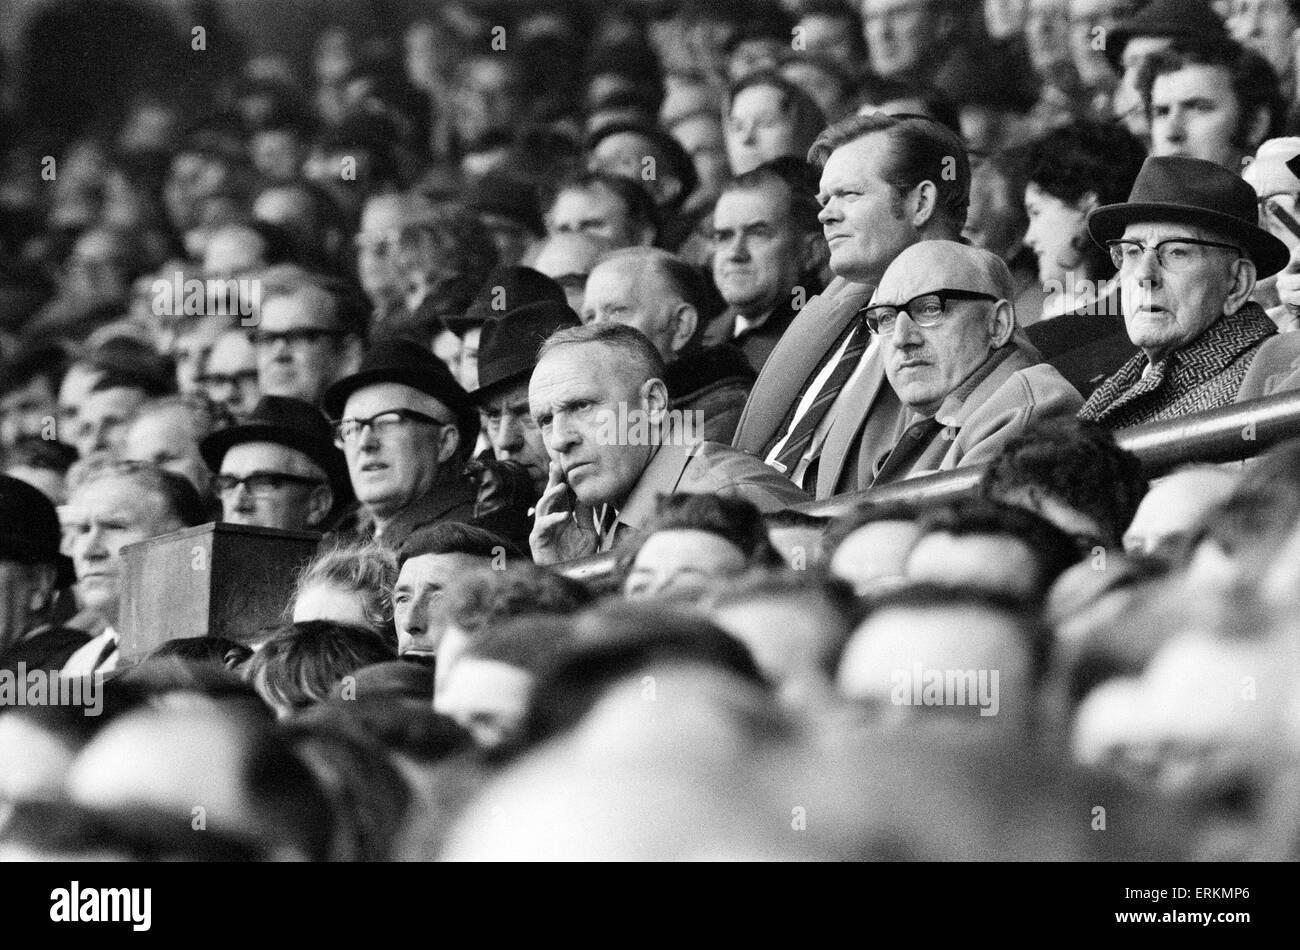 Liverpool Manager Bill Shankly Watching A Game In The Stands